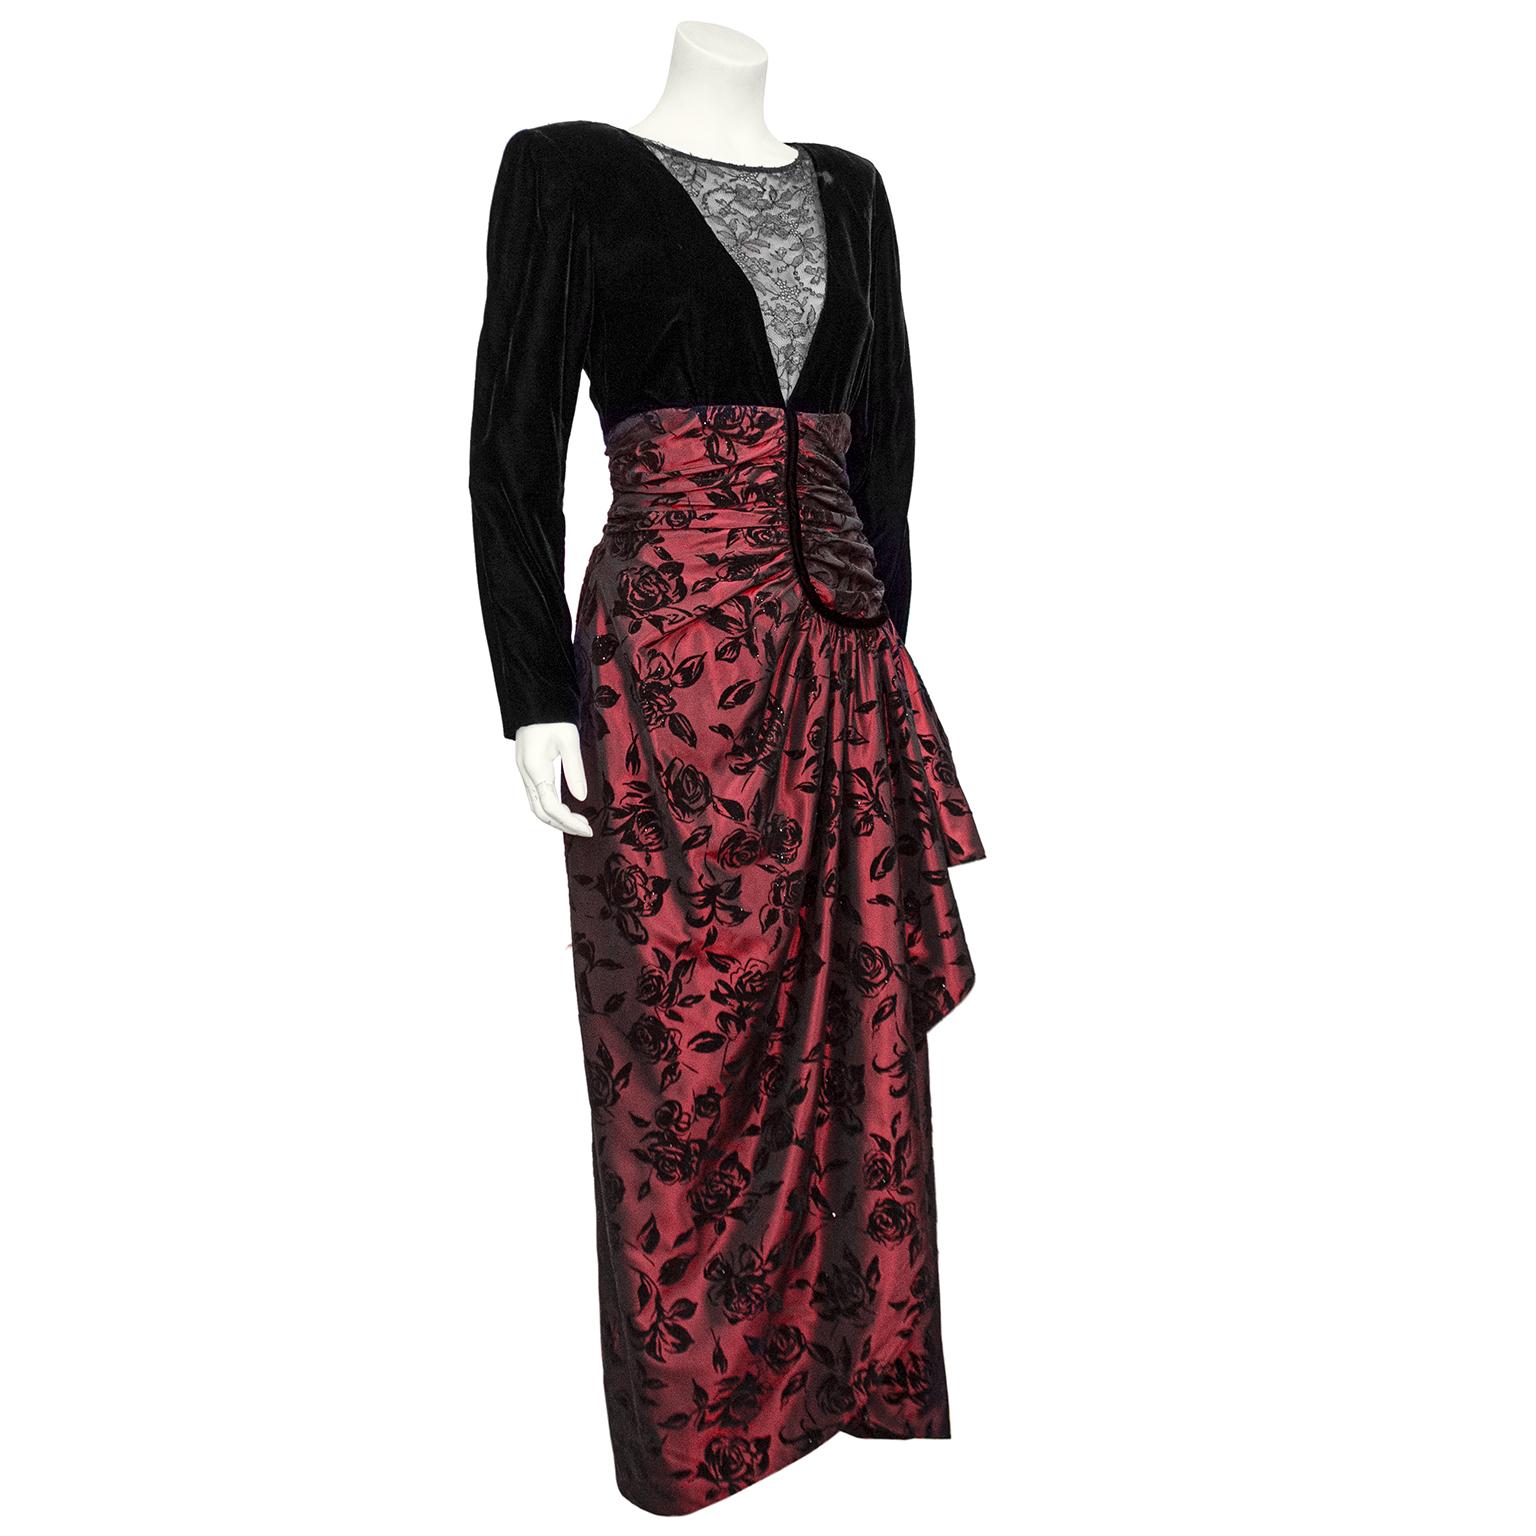 Over the top fabulous Nina Ricci gown from the 1980s. Top is cut black velvet with gathering at padded shoulders and a deep V-neckline inset with elegant black lace. The red silk taffeta skirt with all over black velvet roses starts just under bust